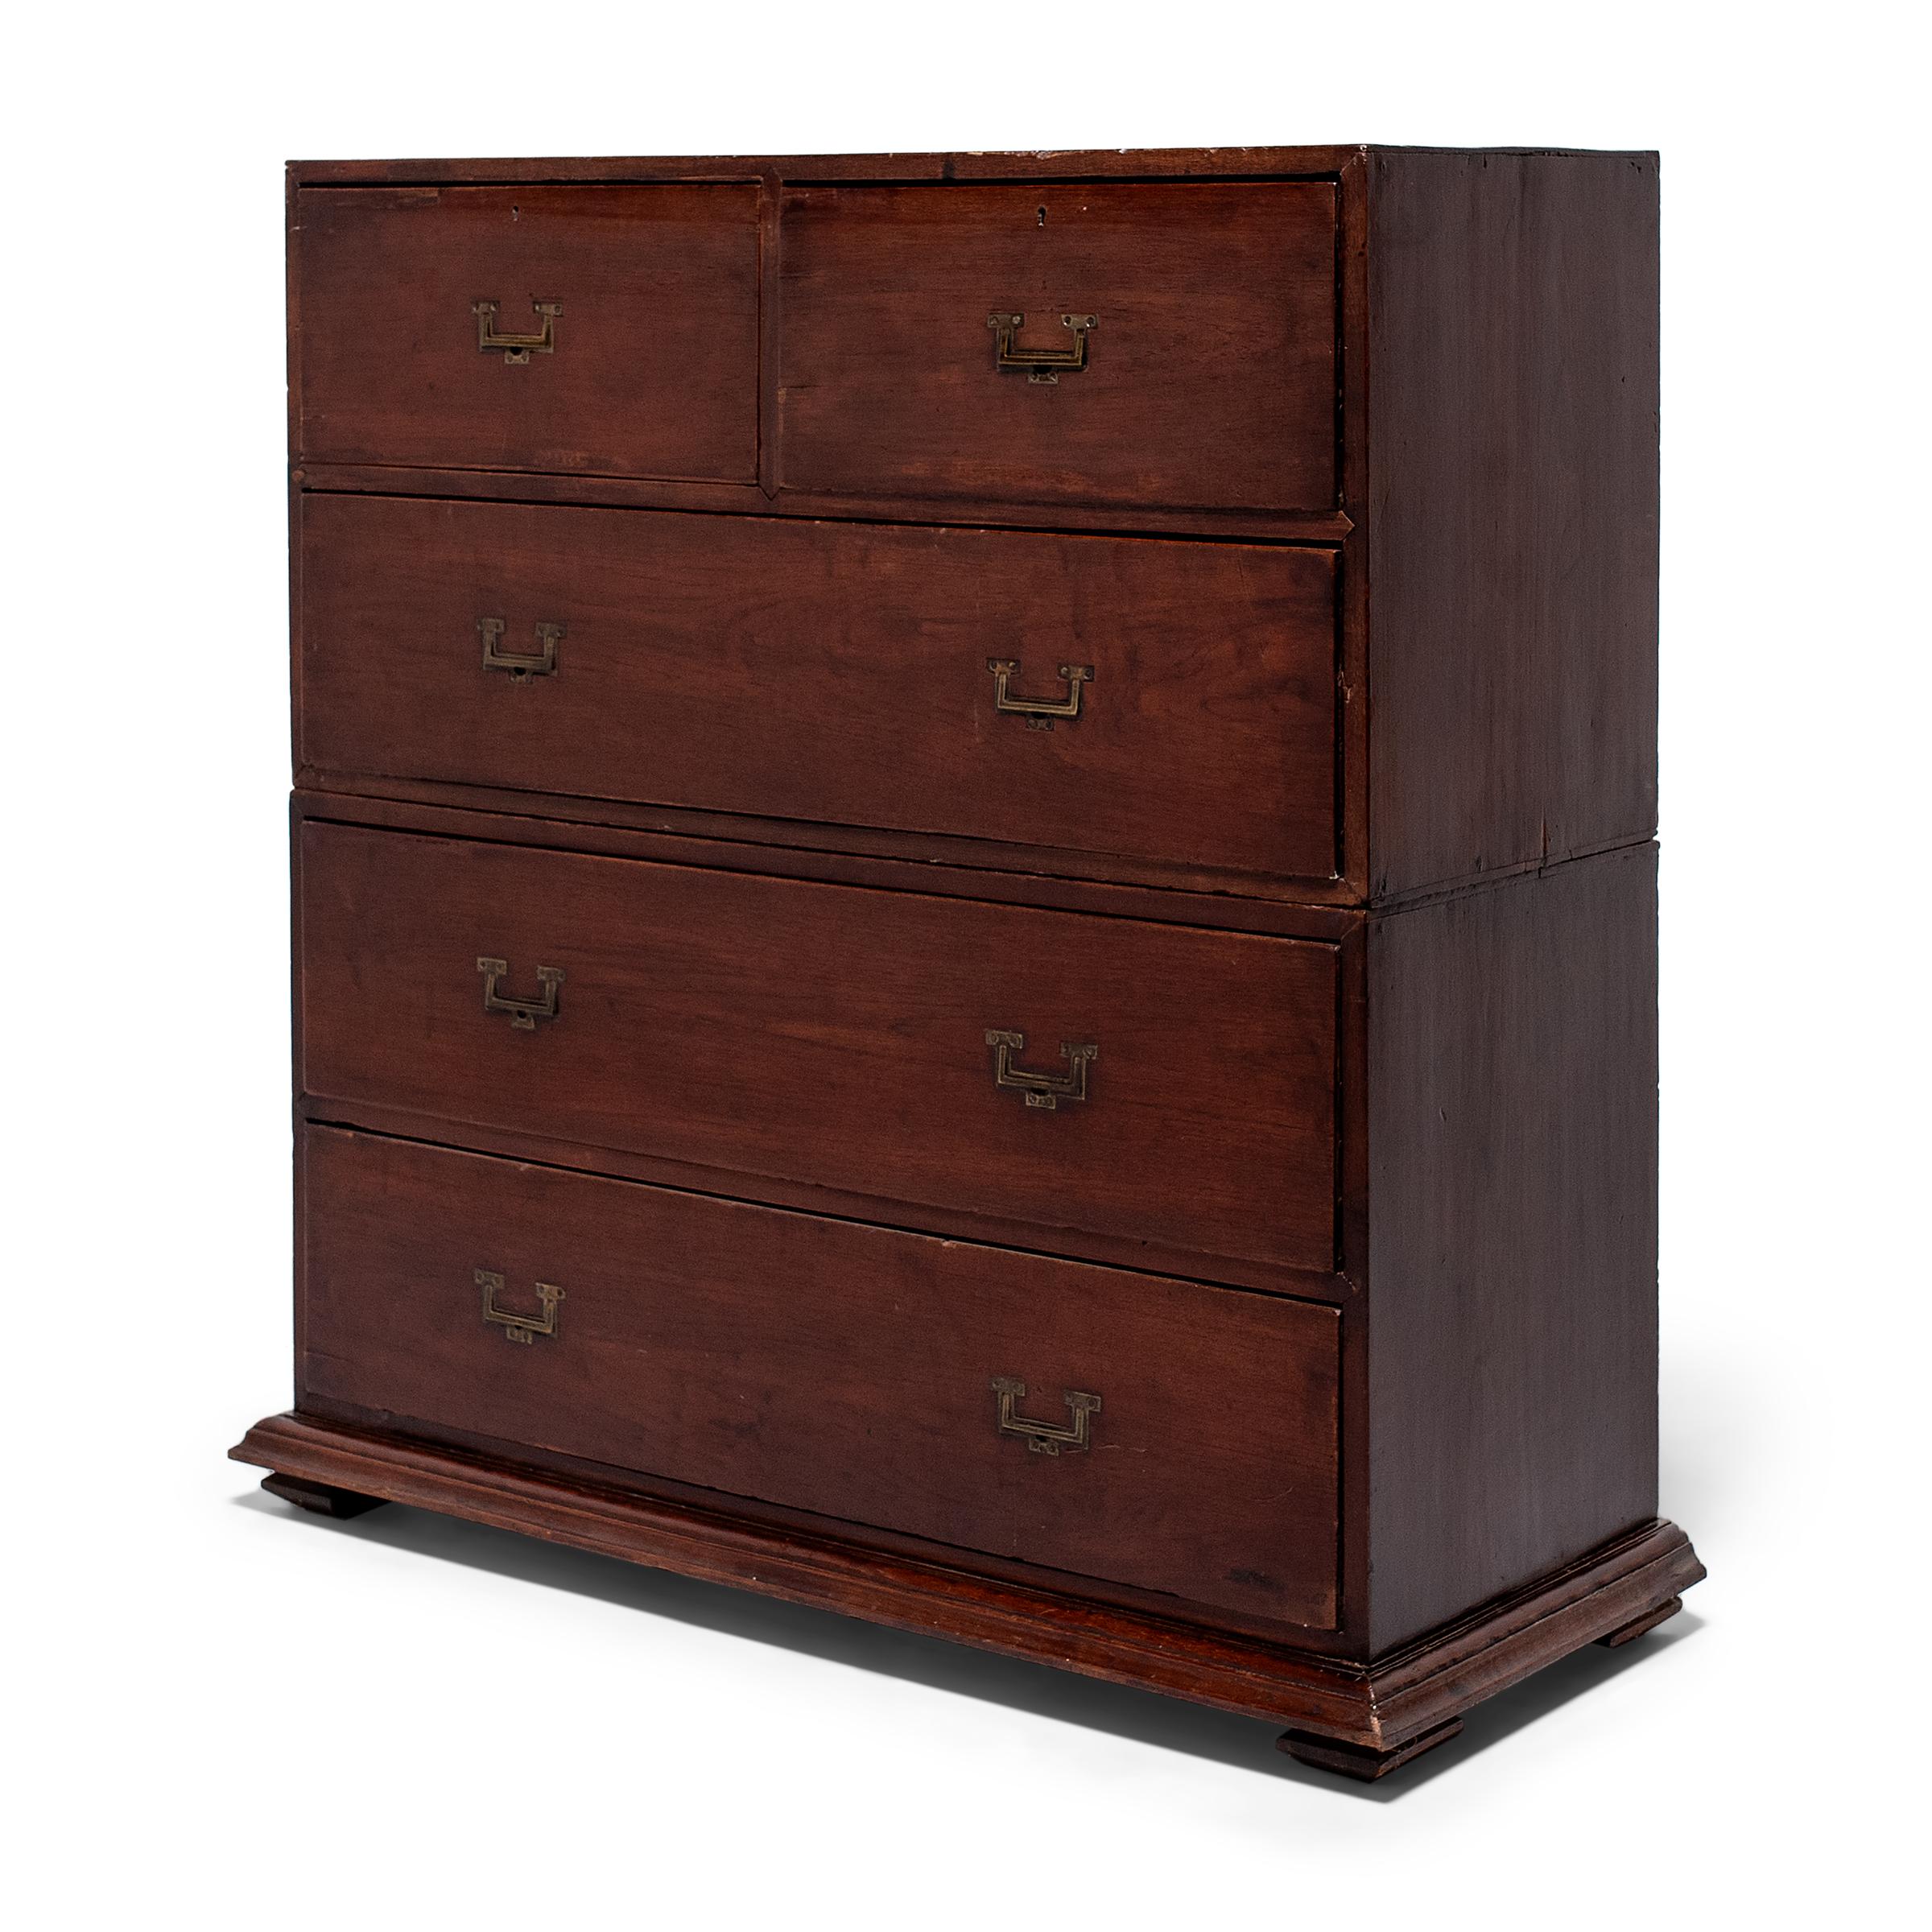 This fantastic two-piece chest of drawers dates to the late 19th century and originated as a military campaign chest, designed to follow dimensional requirements set by The British Army General Order of 1871. The cabinet is comprised of two separate